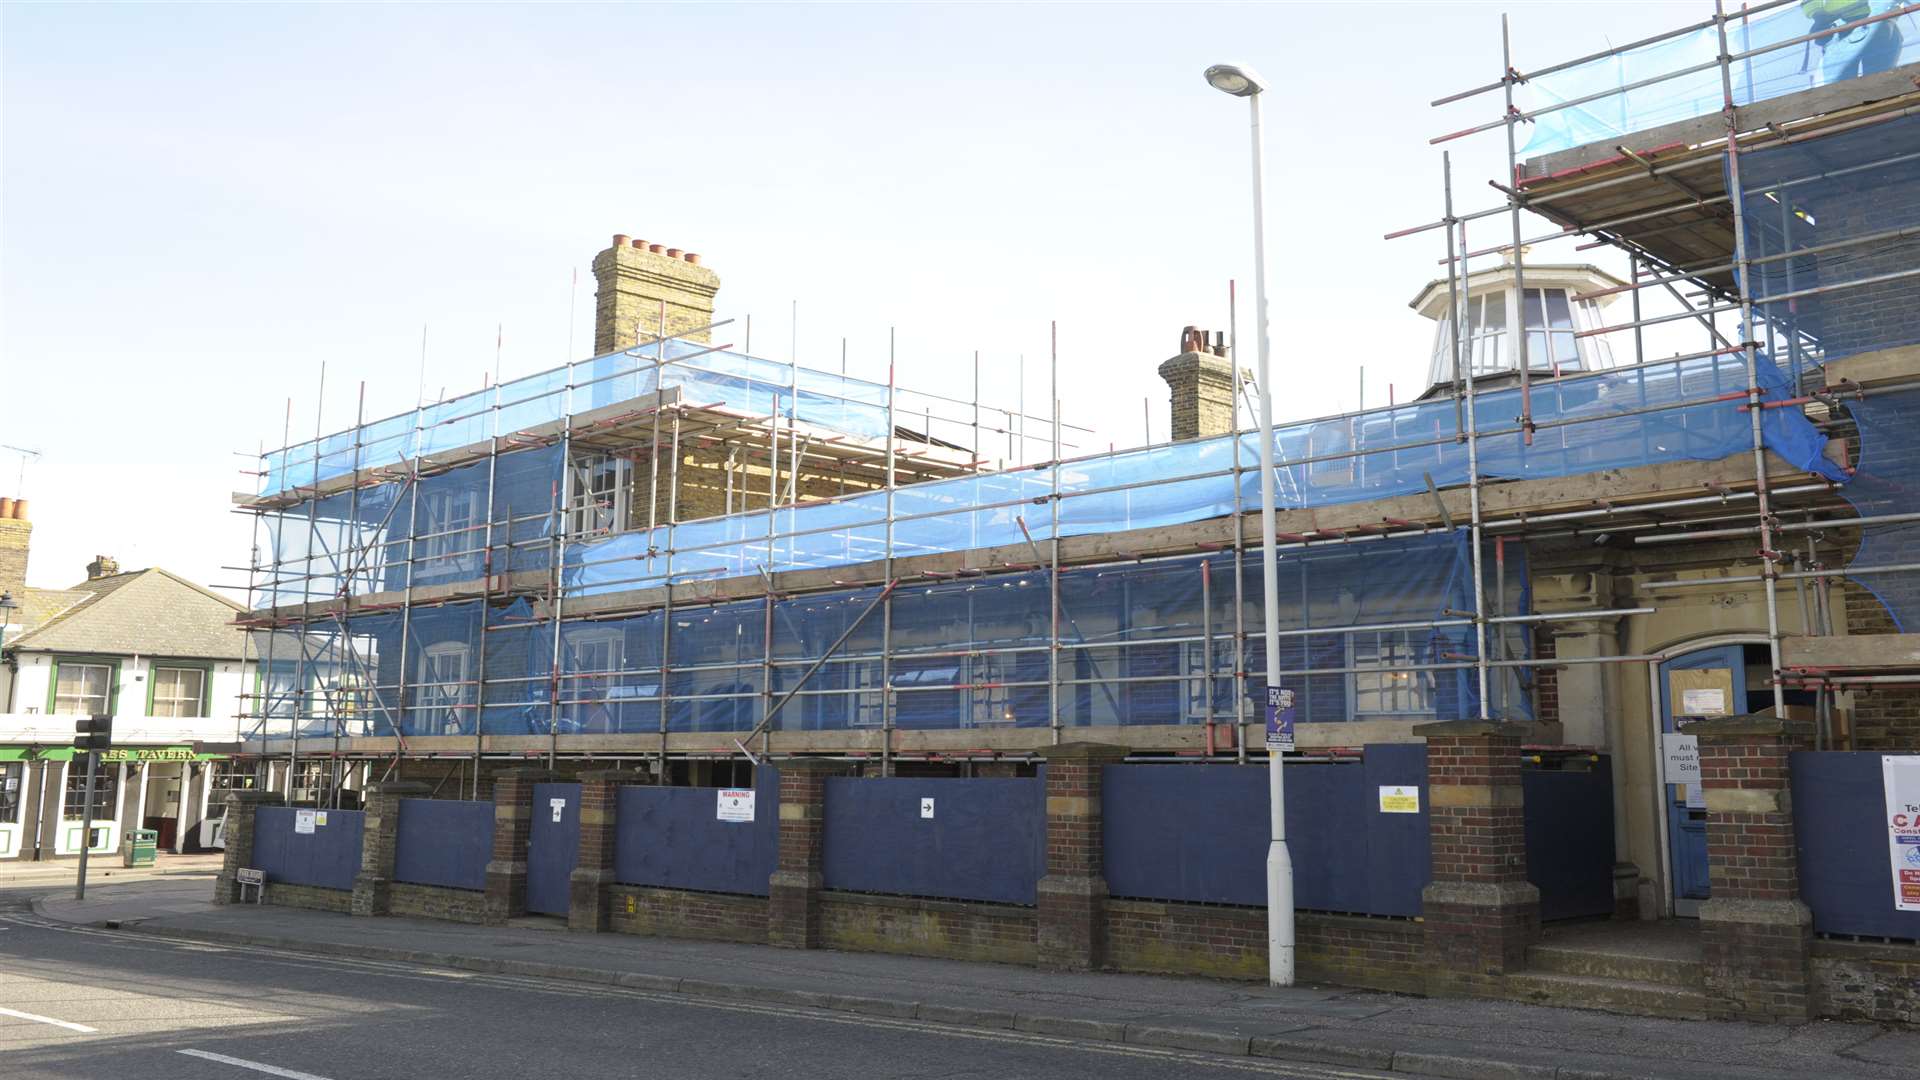 The former Sittingbourne Magistrates' Court in Park Road will soon be a Wetherspoon pub